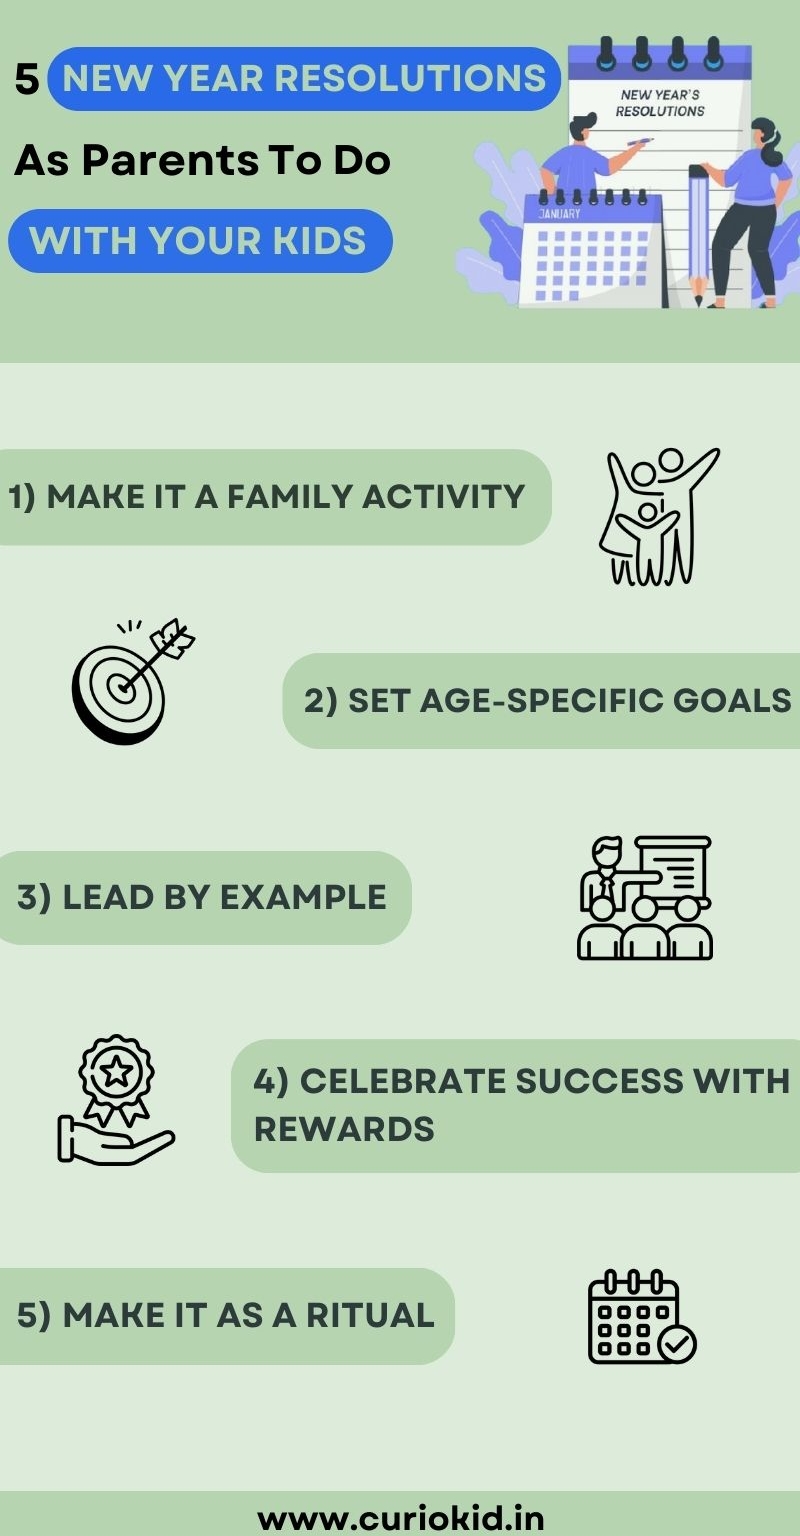 5 New Year Resolutions As Parents To Do With Your Kids